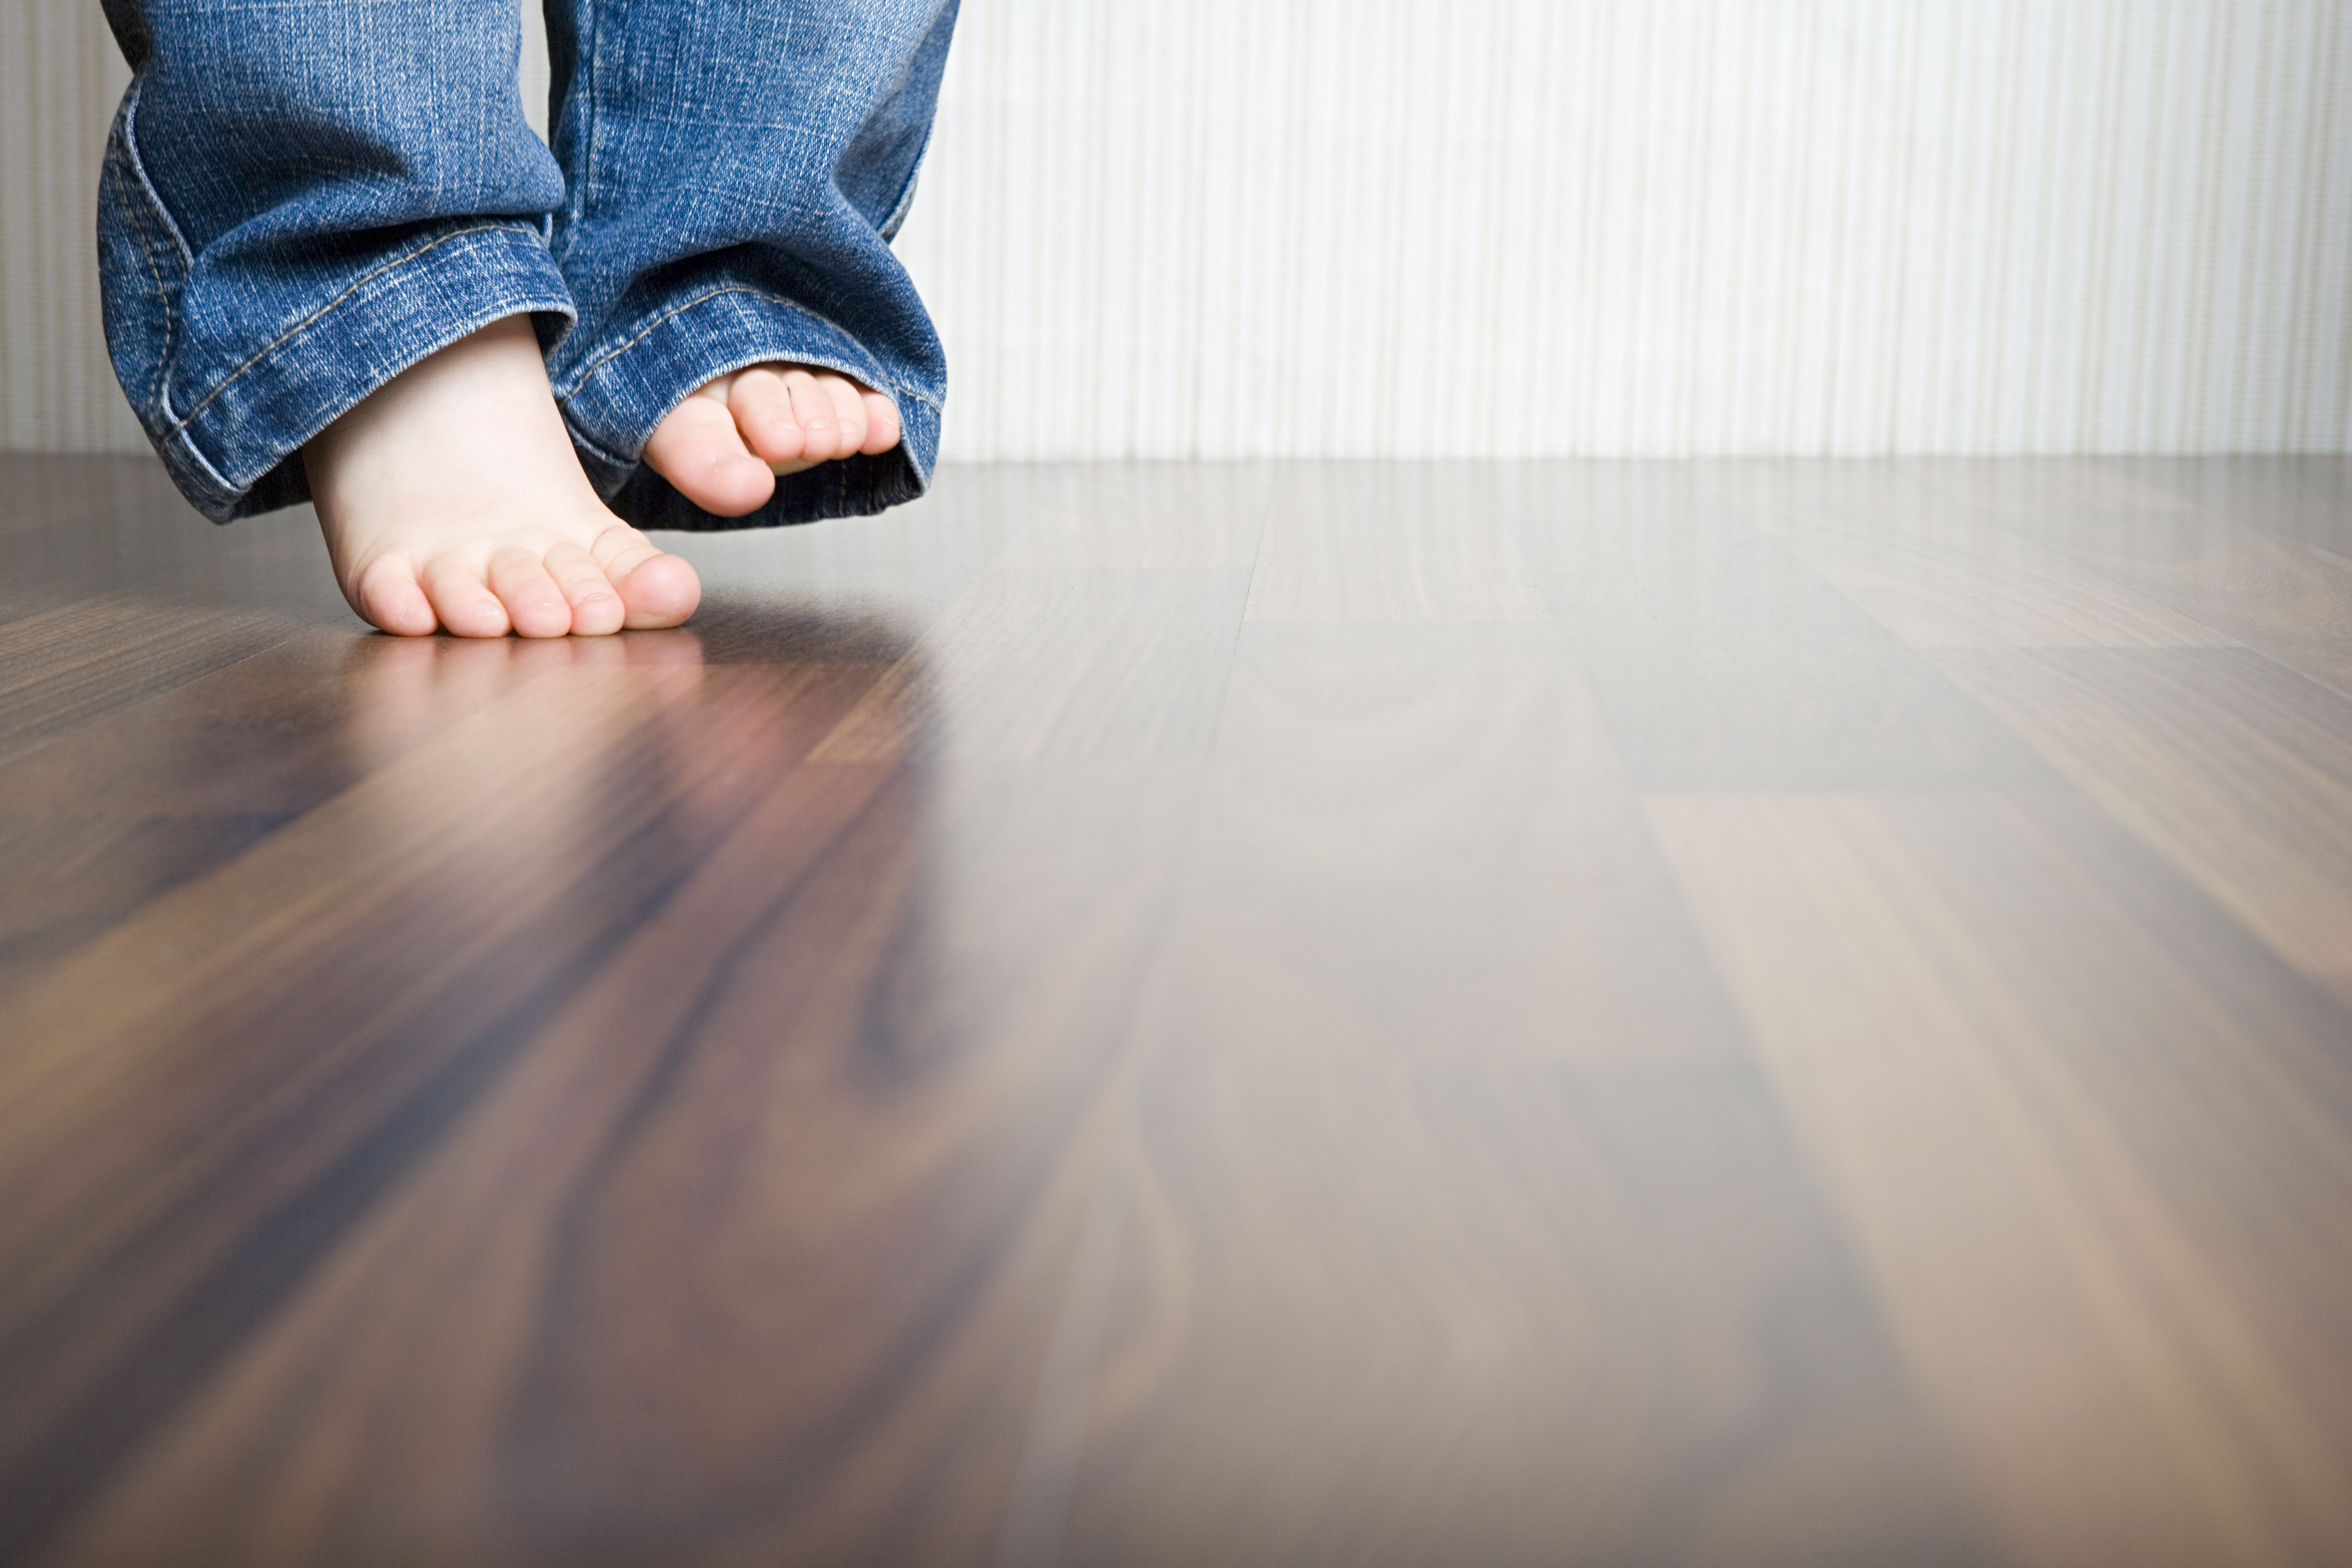 cleaning mohawk engineered hardwood floors of how to clean hardwood floors best way to clean wood flooring for 1512149908 gettyimages 75403973